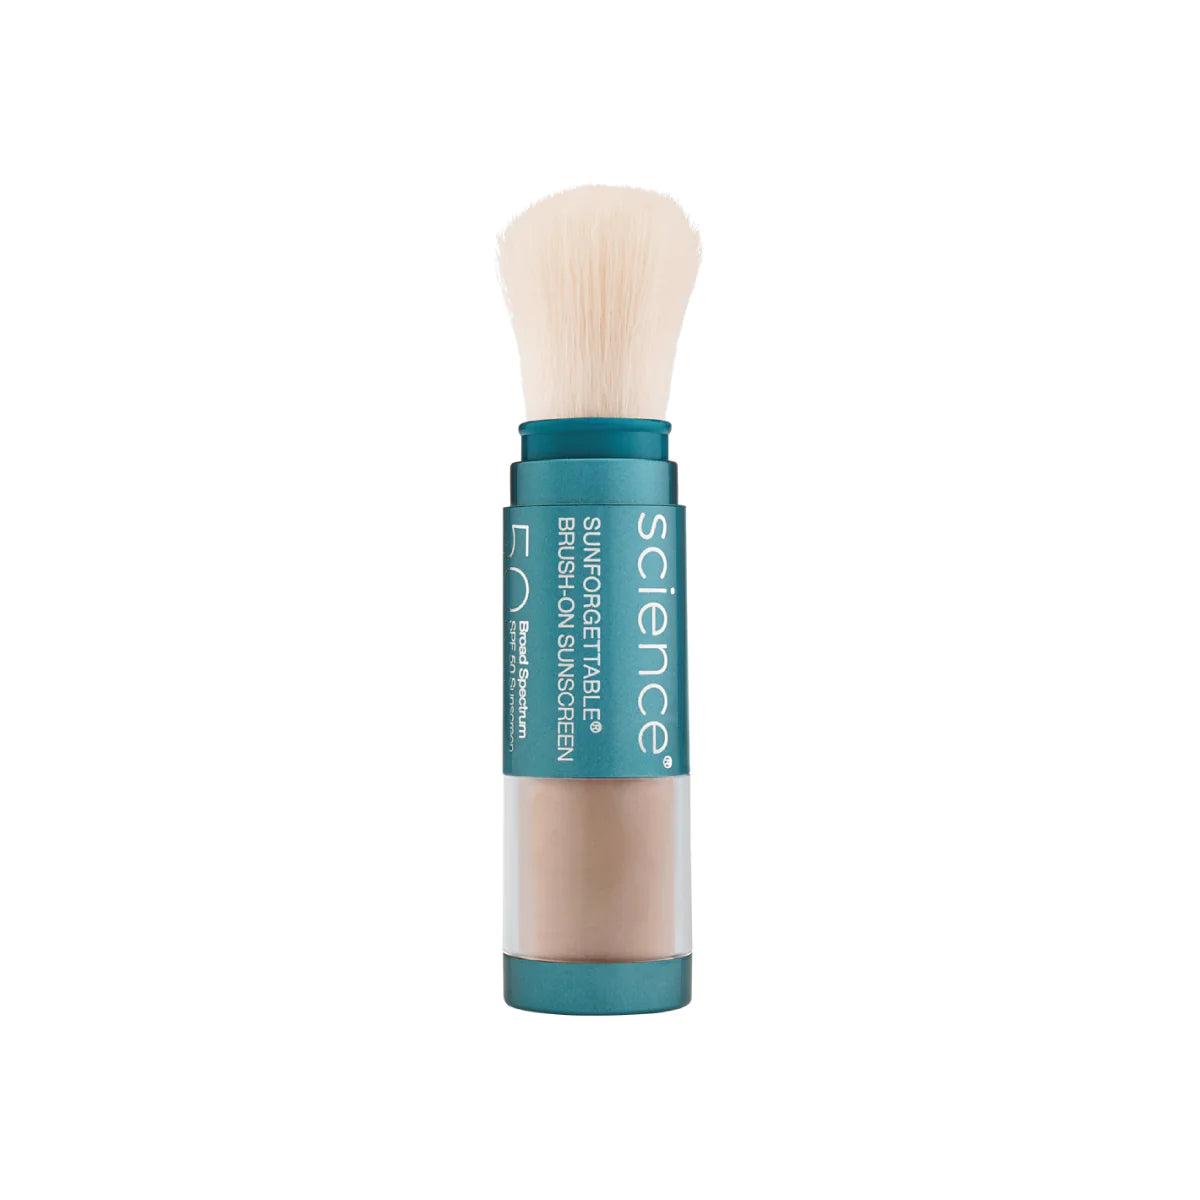 COLORSCIENCE SUNFORGETTABLE TOTAL PROTECTION BRUSH-ON SHIELD SPF 50 (FAIR) 6G